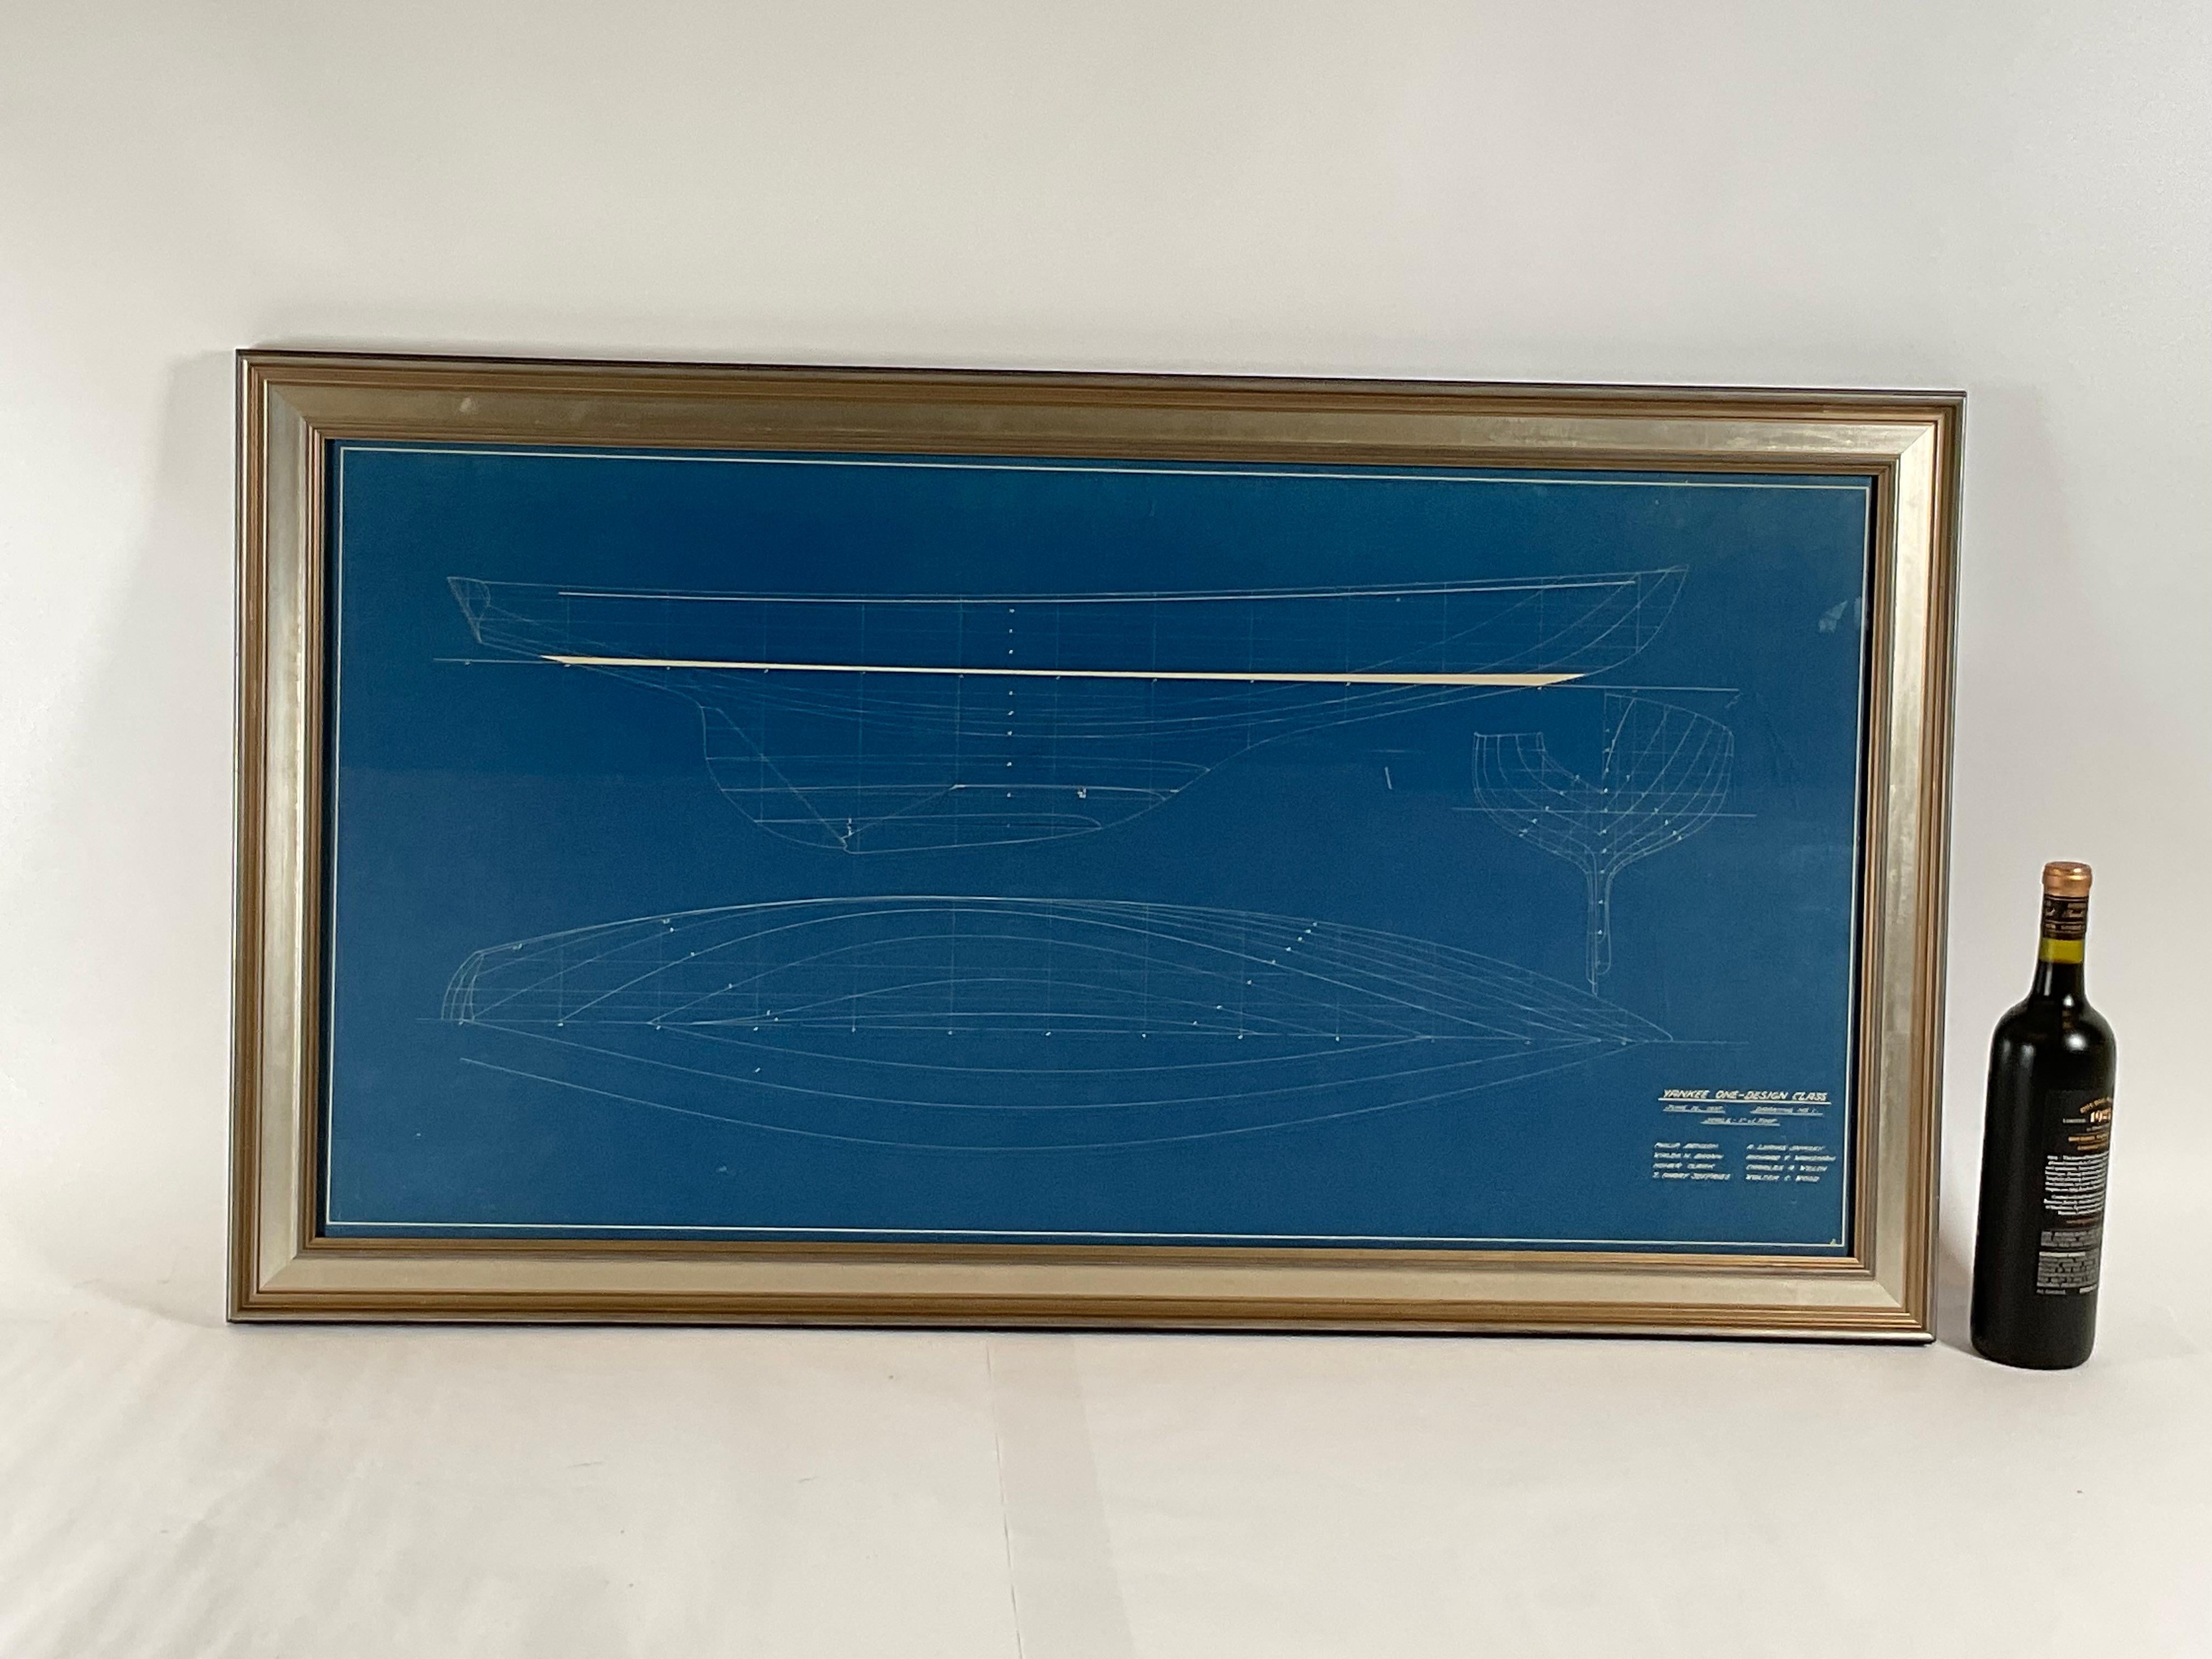 Yacht blueprint by W. Starling Burgess of the famous Yankee one design class sloop. Legend reads Yankee one design class, June 16, 1937, drawing number one, scale one inch equals one foot. This is an extremely rare set of blueprints from the table